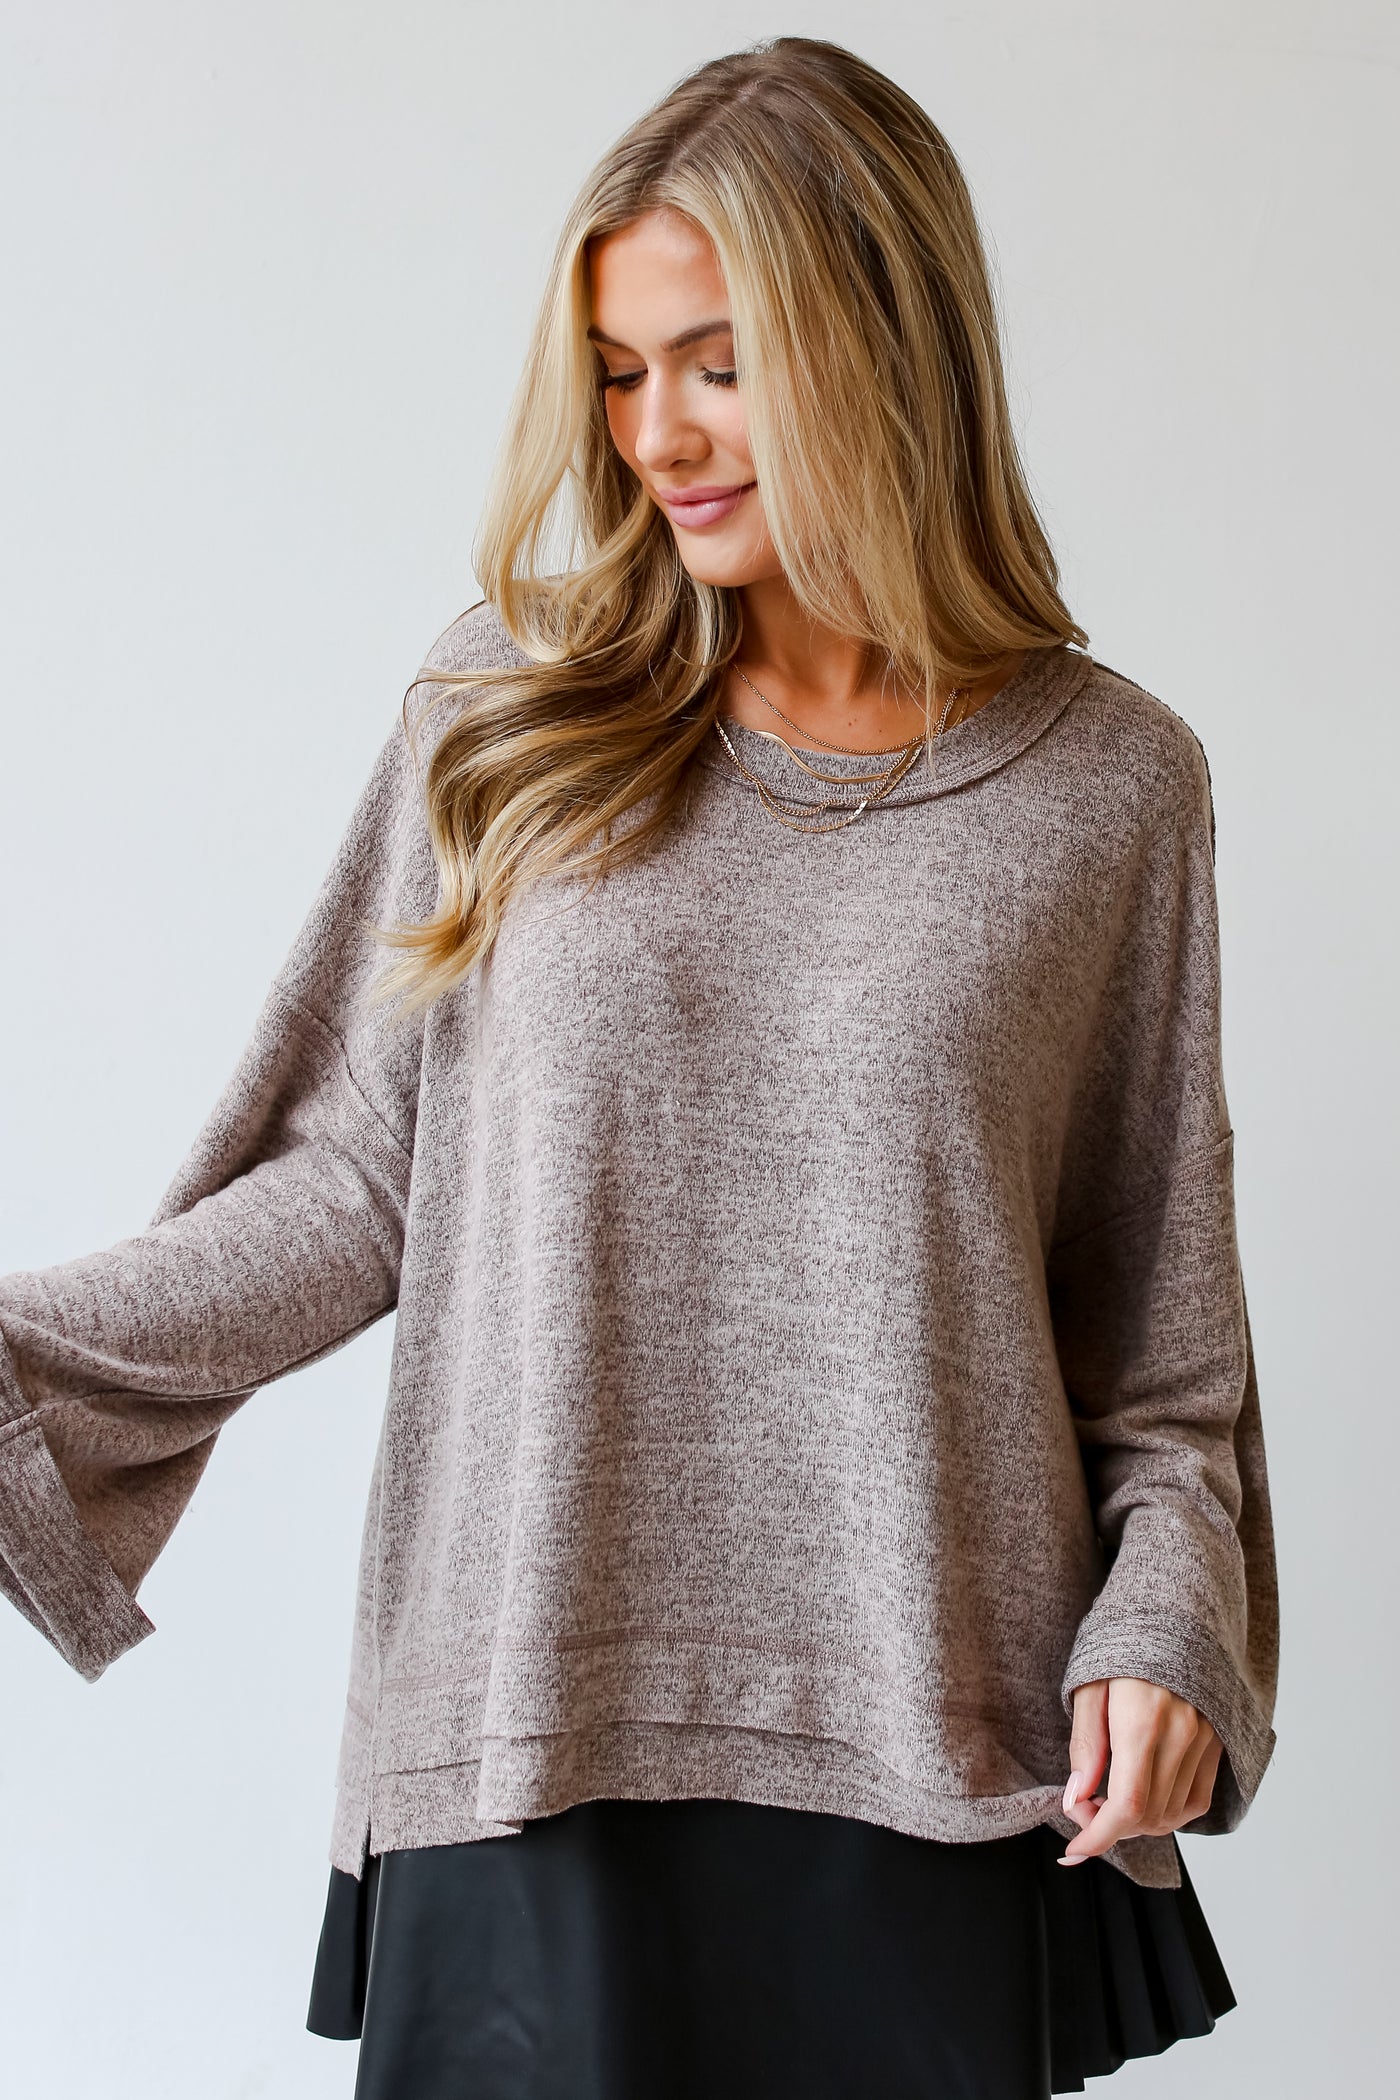 brown sweater on model